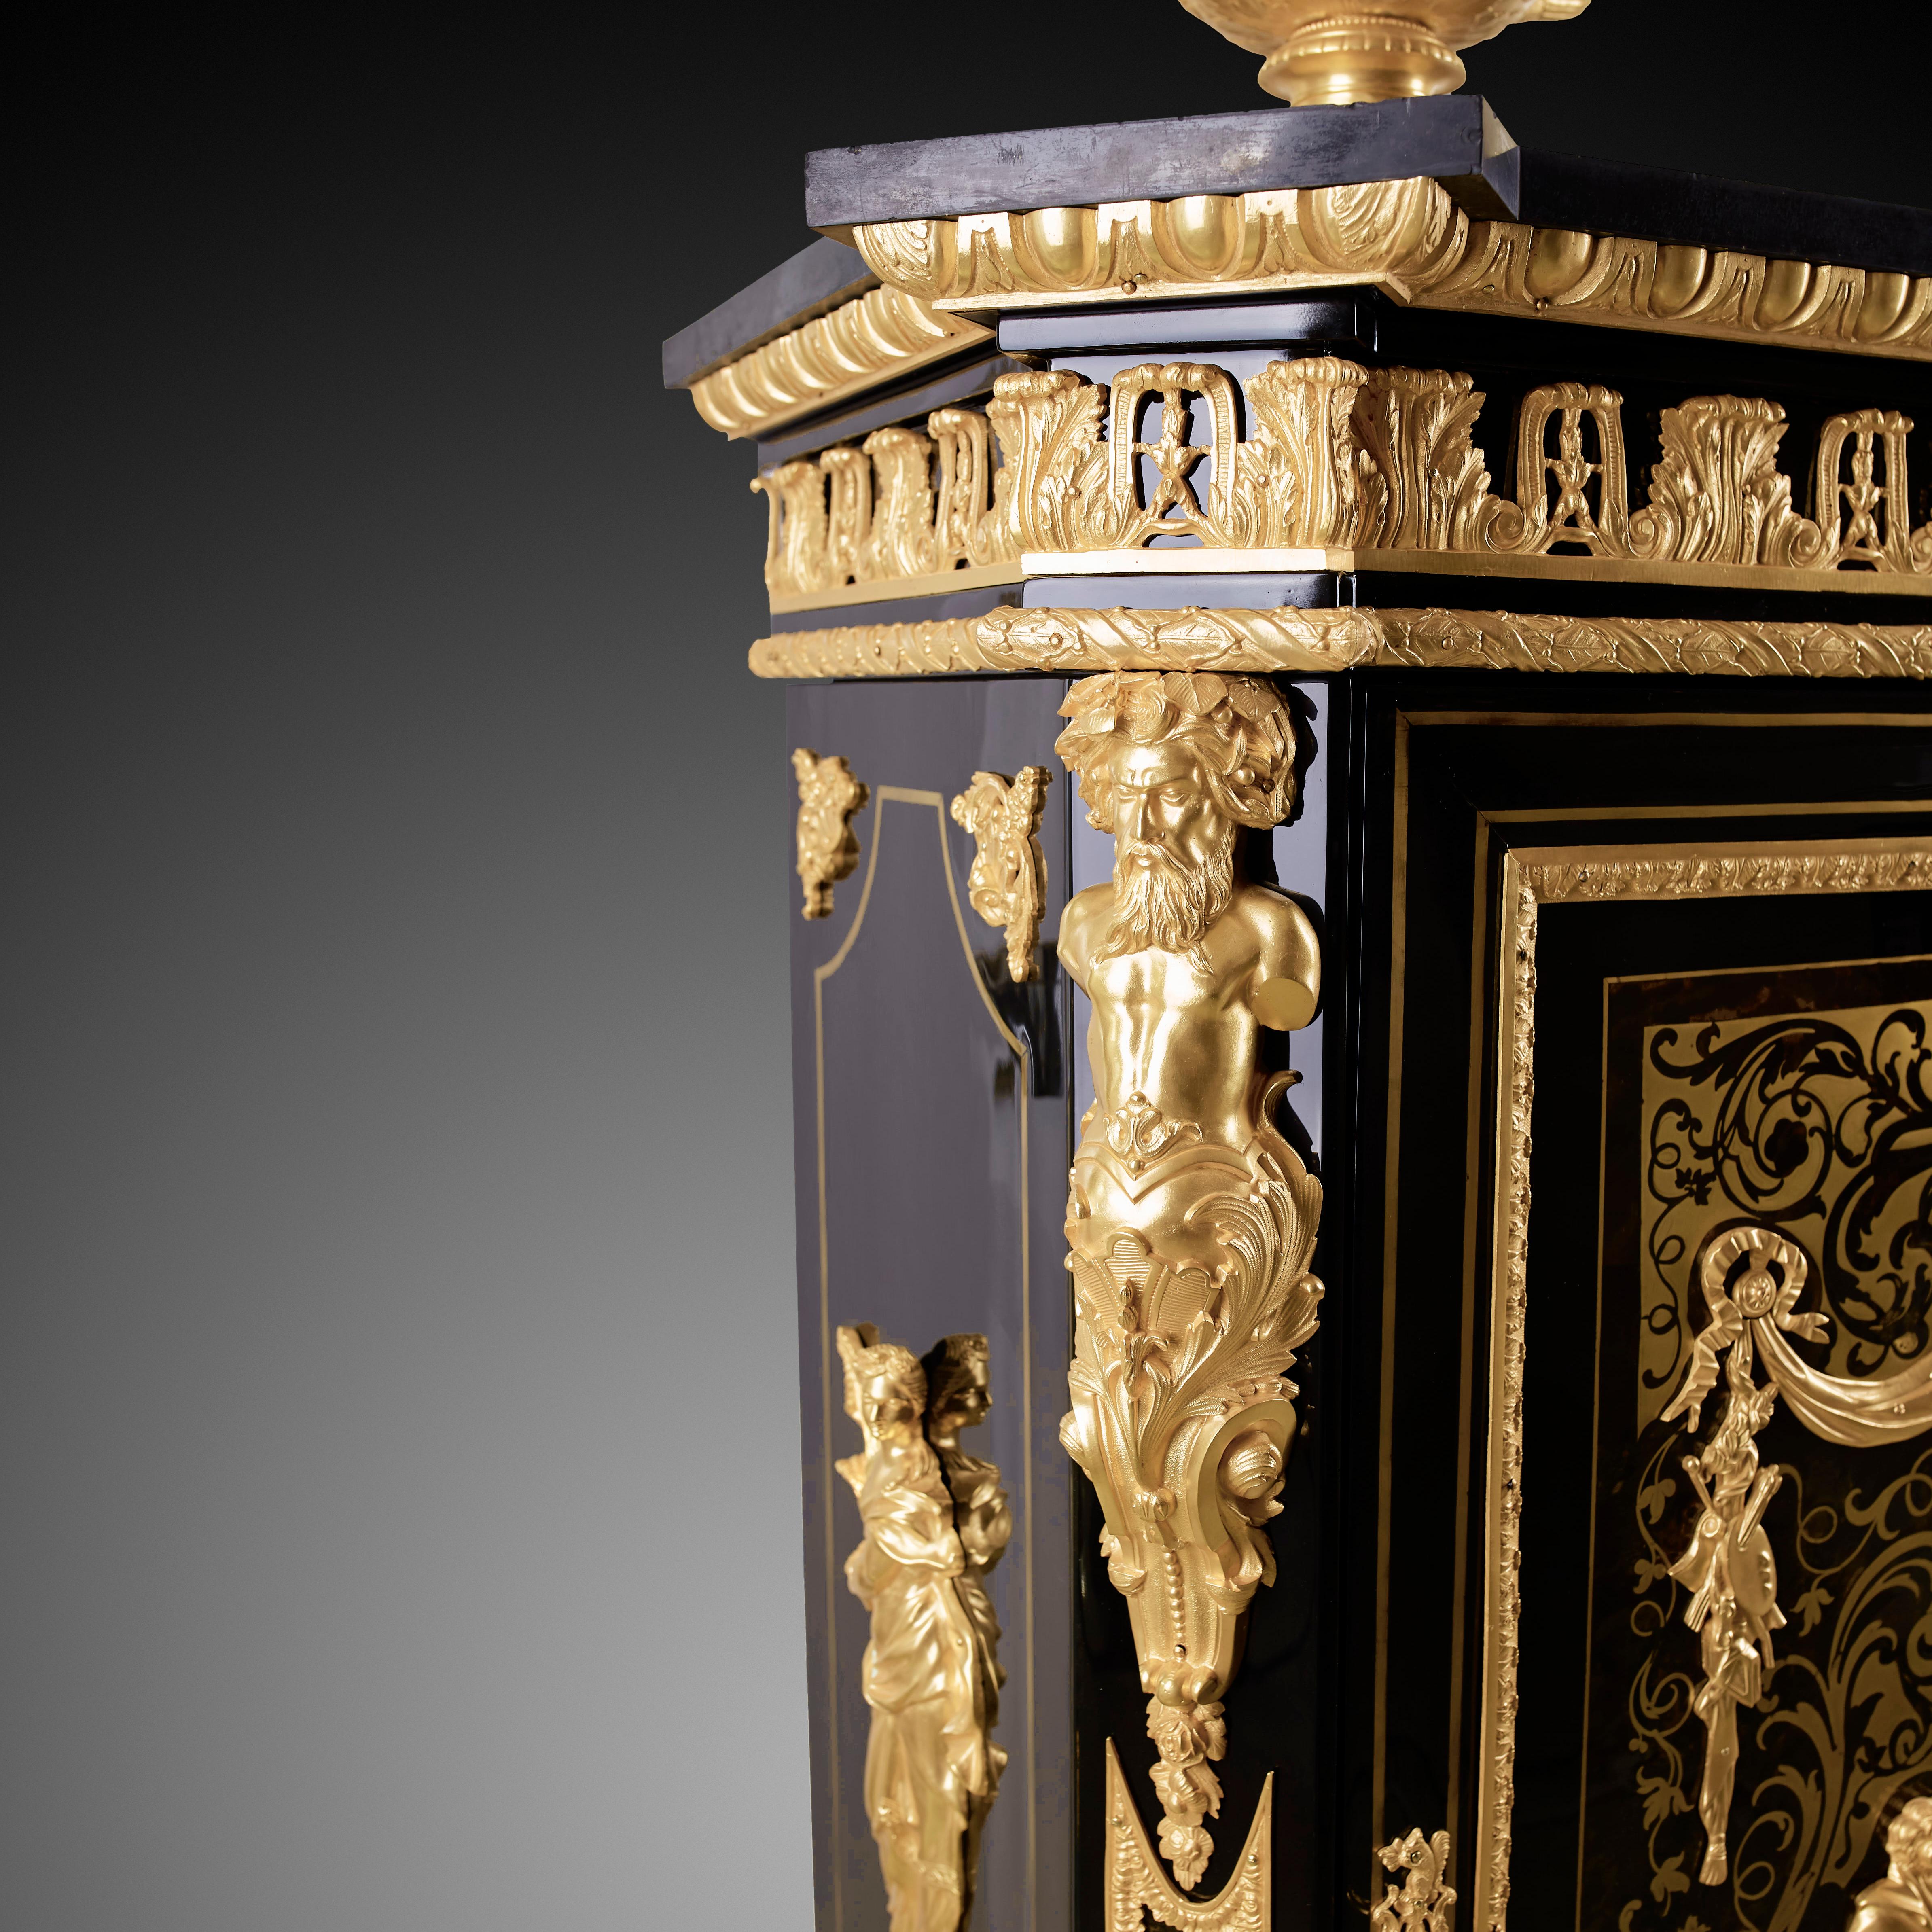 This Napoleon III Style cabinet is made of black polished wood, mounted with gilt bronze, inlaid with brass and resting on top is a plate of Belgian black marble. The Napoleon III style, named after Louis-Napoleon Bonaparte, the French emperor who